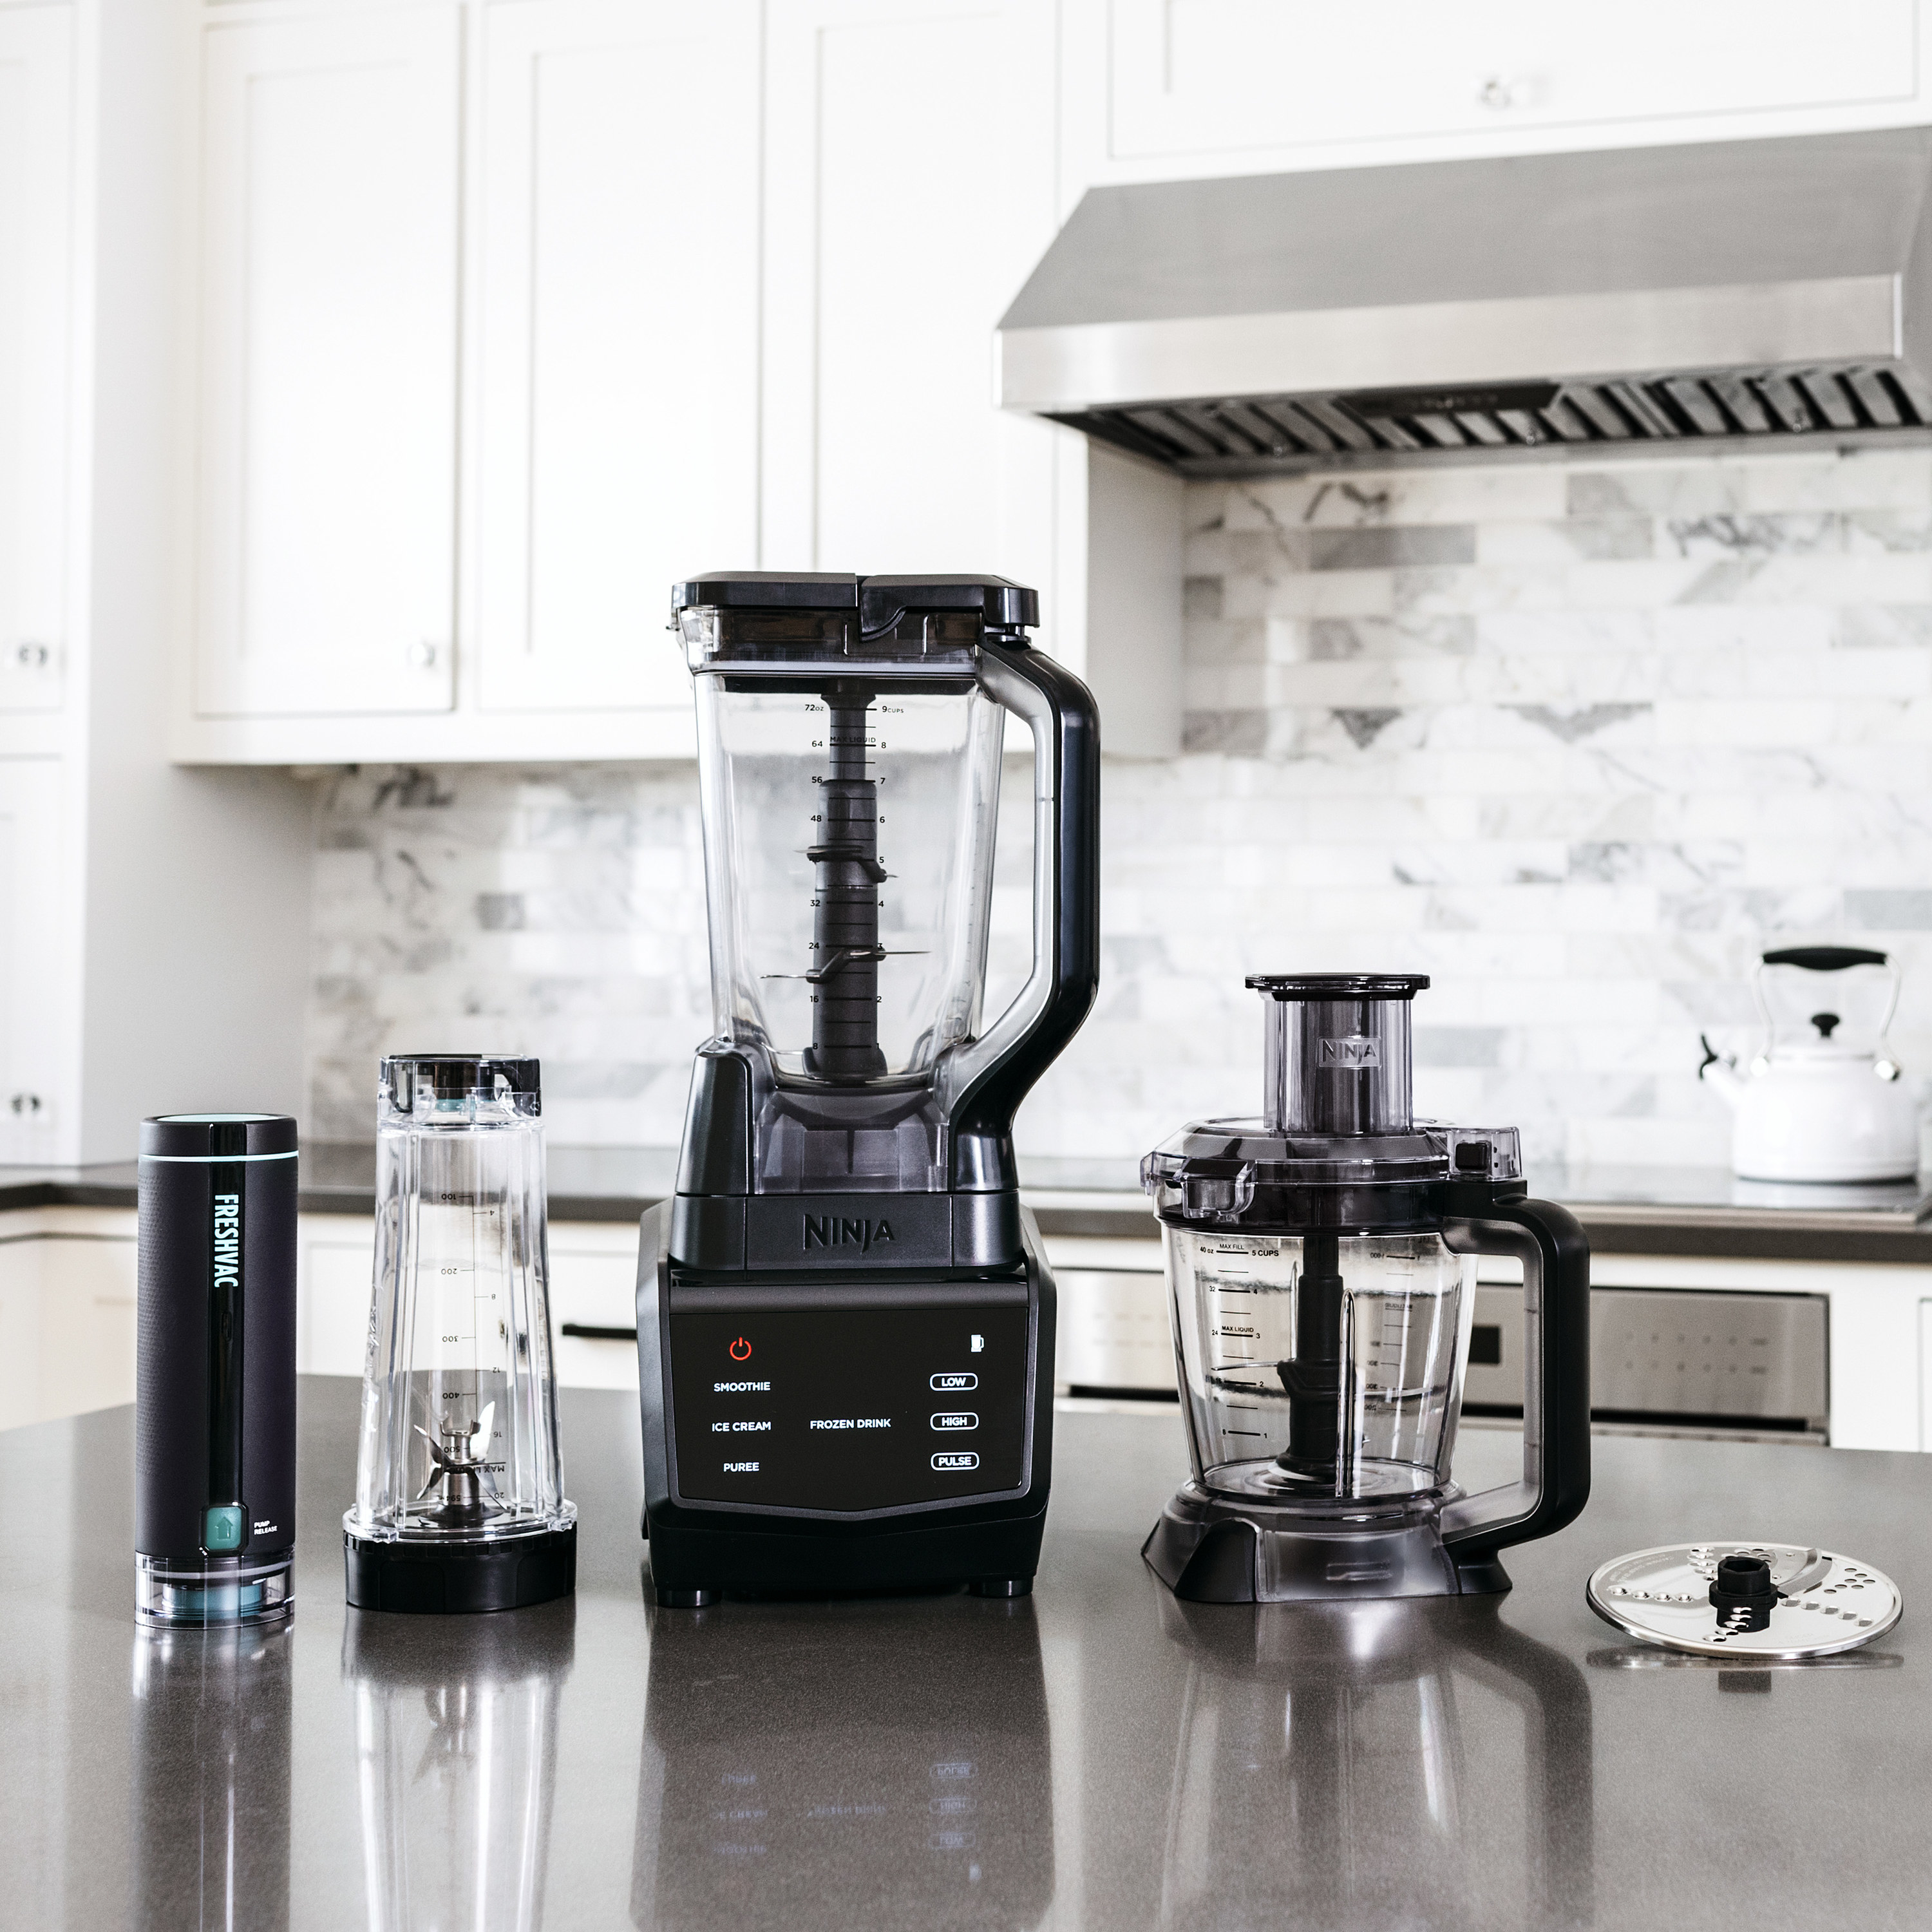 the blender and attachments on a counter